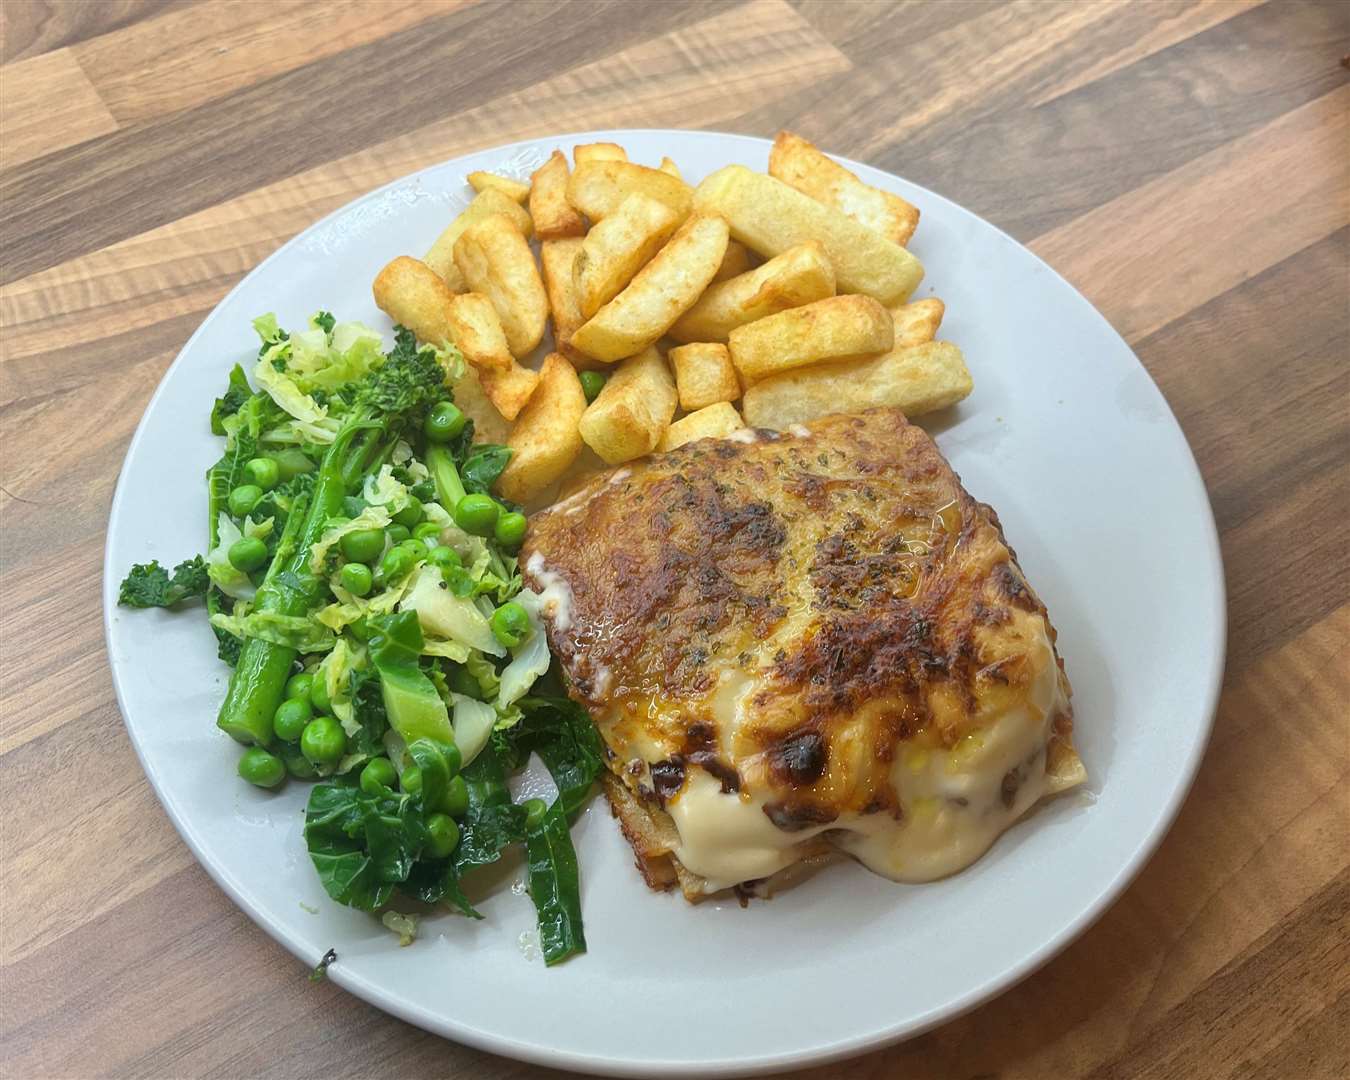 The Asda main course of lasagne, triple-cooked chips and green vegetables